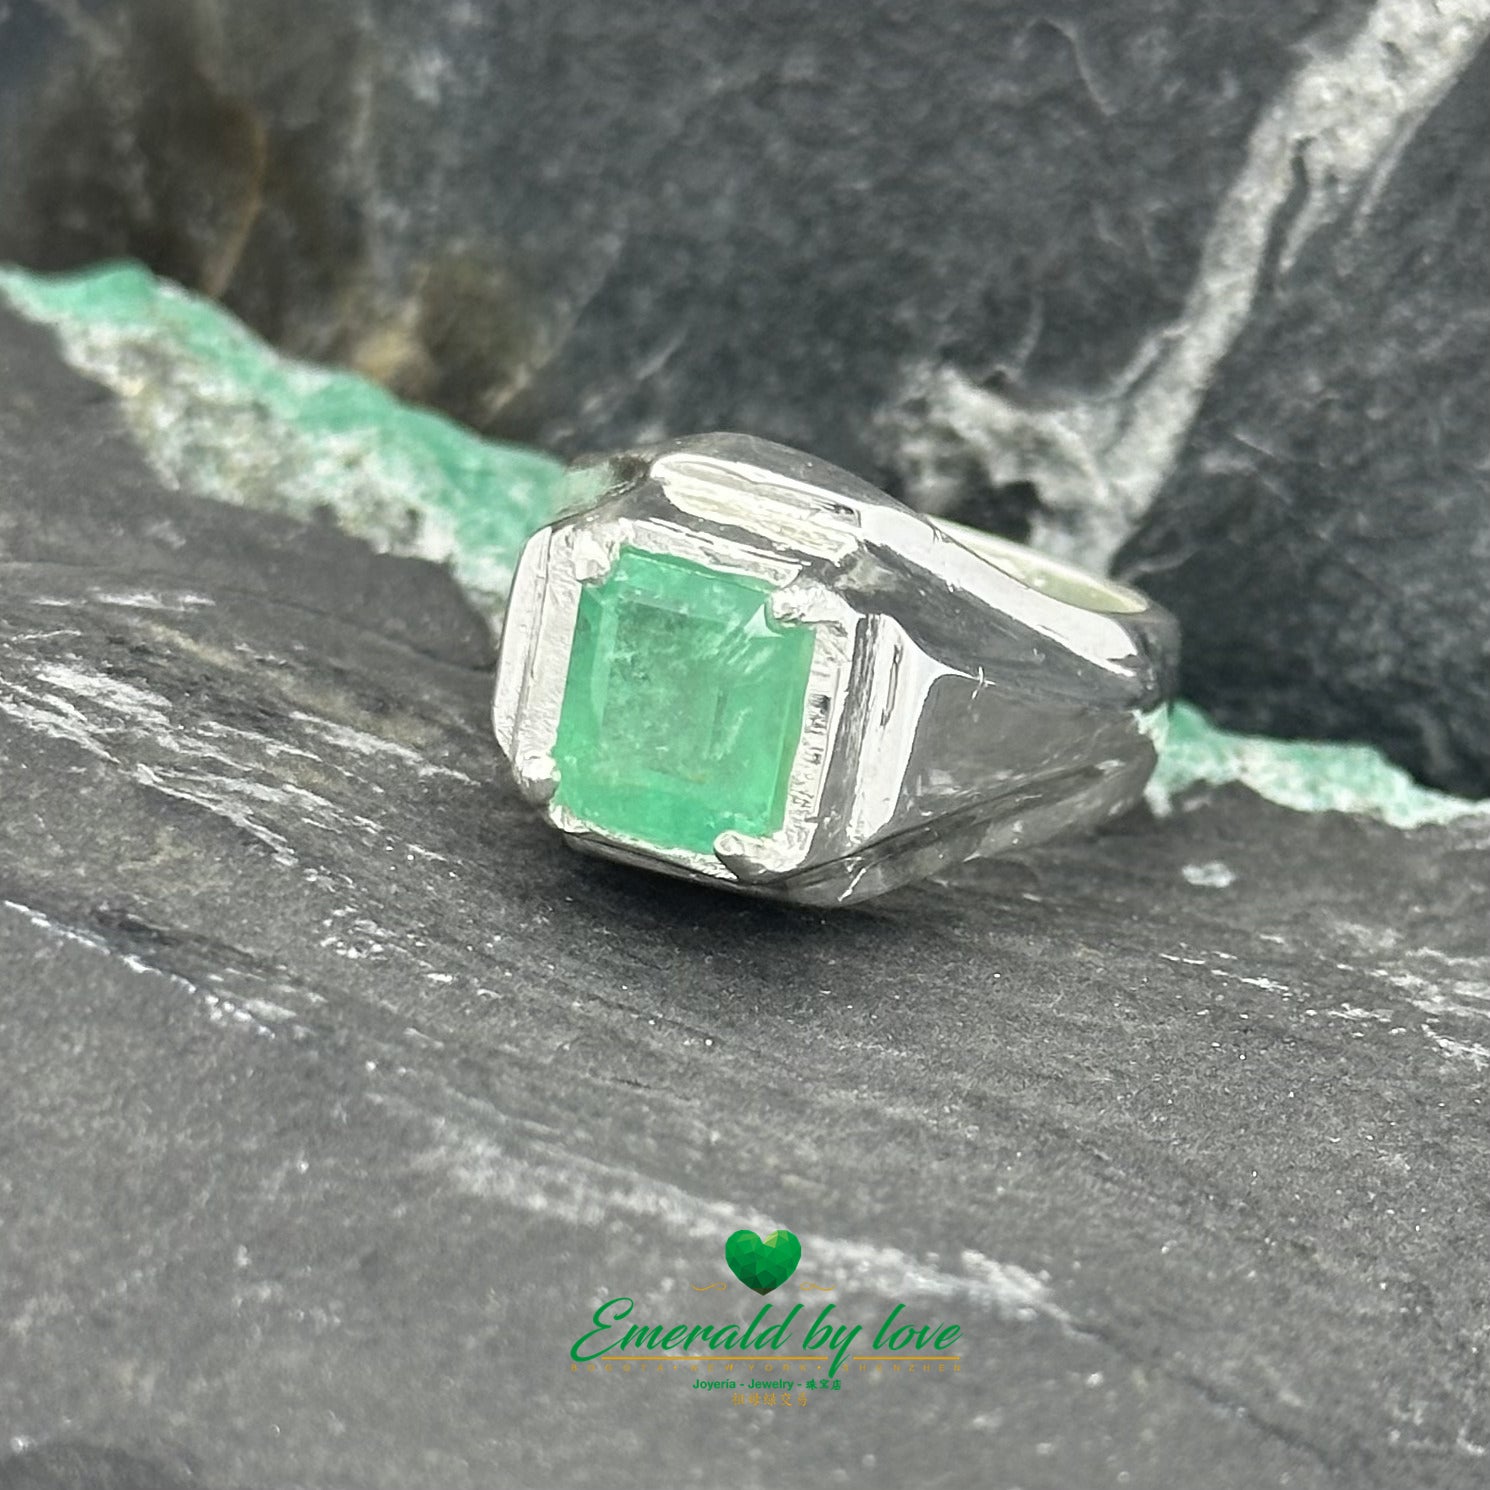 Square Emerald Men's Ring with Four-Prong Setting in Silver